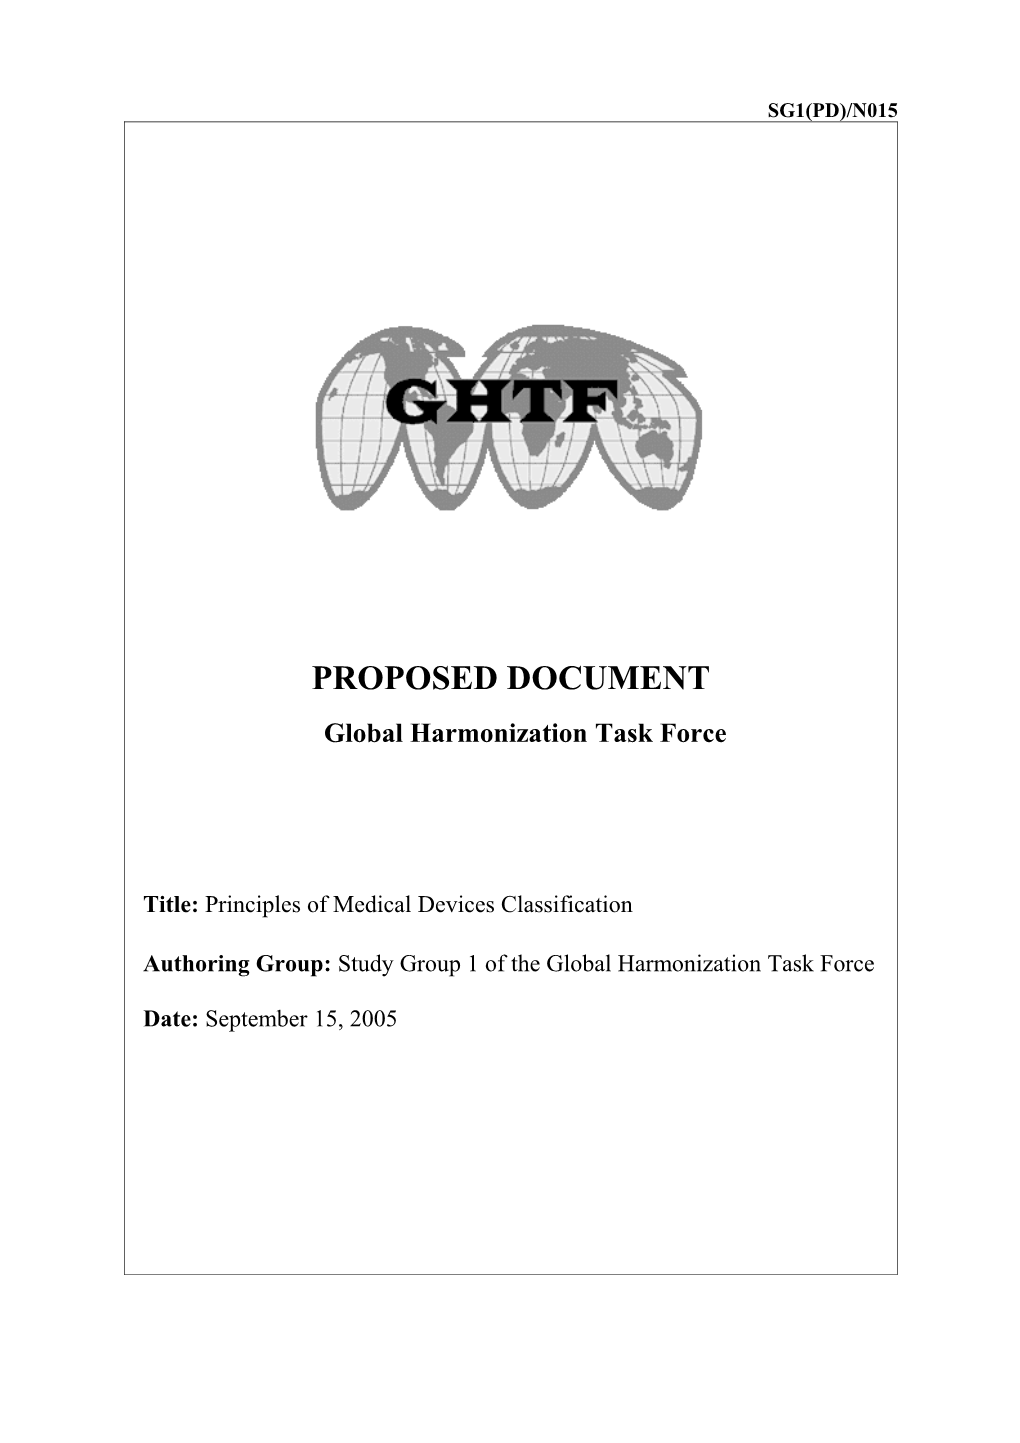 GHTF SG1 - Principles of Medical Devices Classification - September 2005